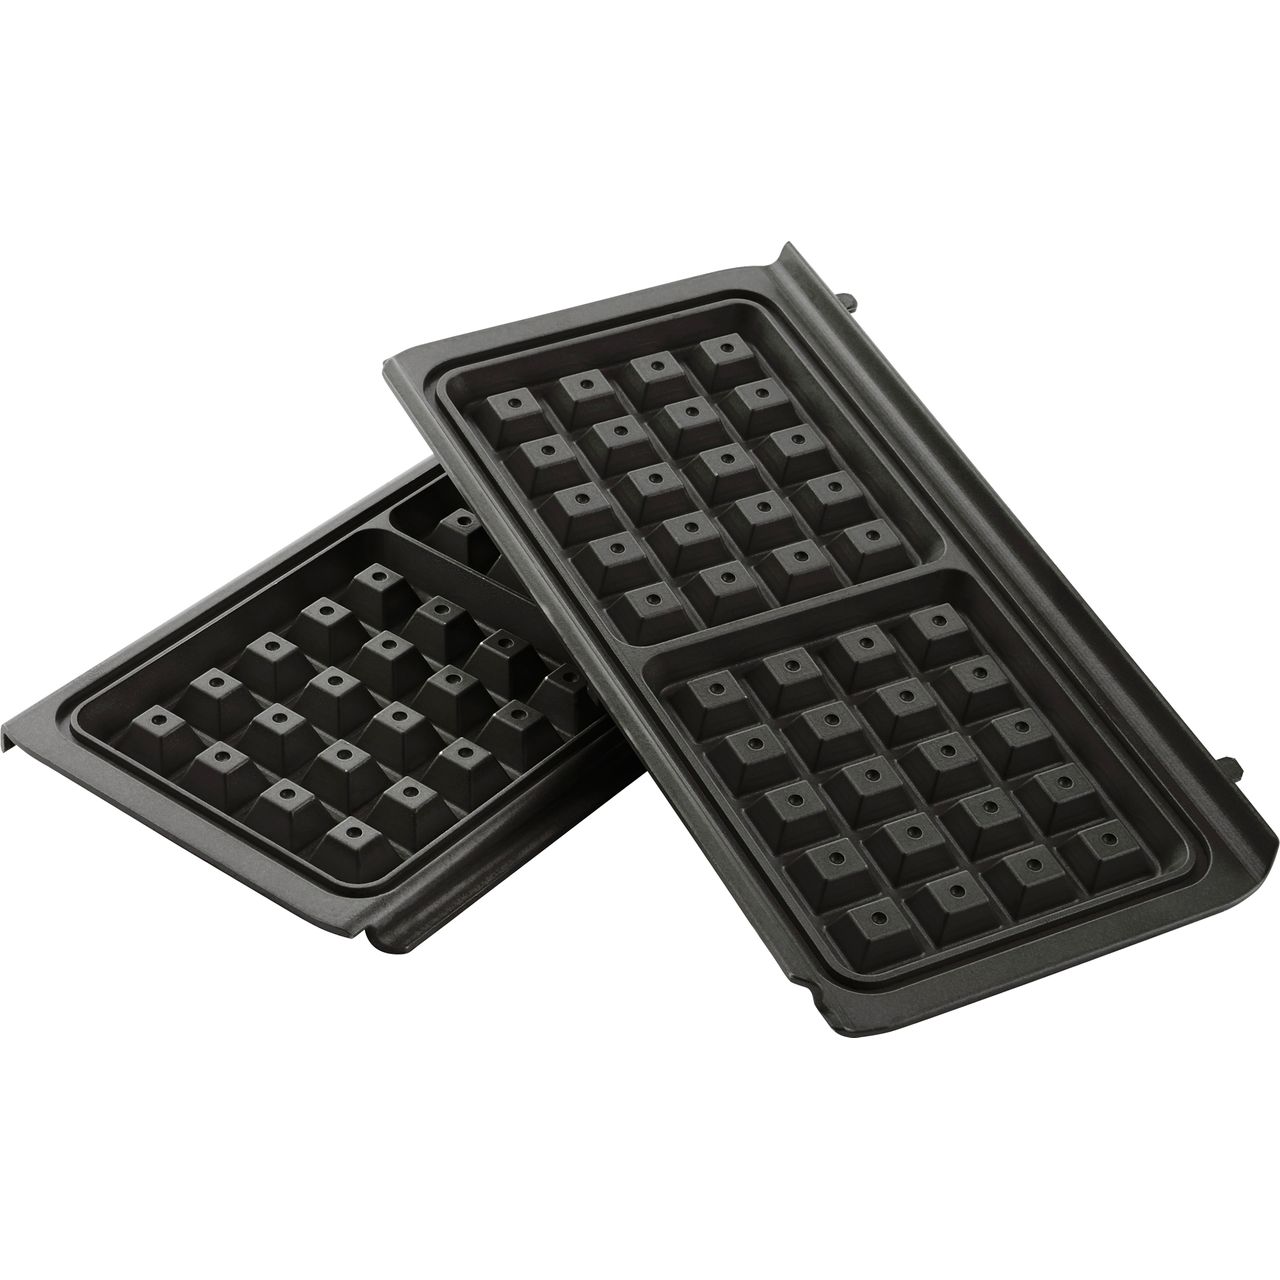 Breville VST079 Deep Fill Waffle Plates Review